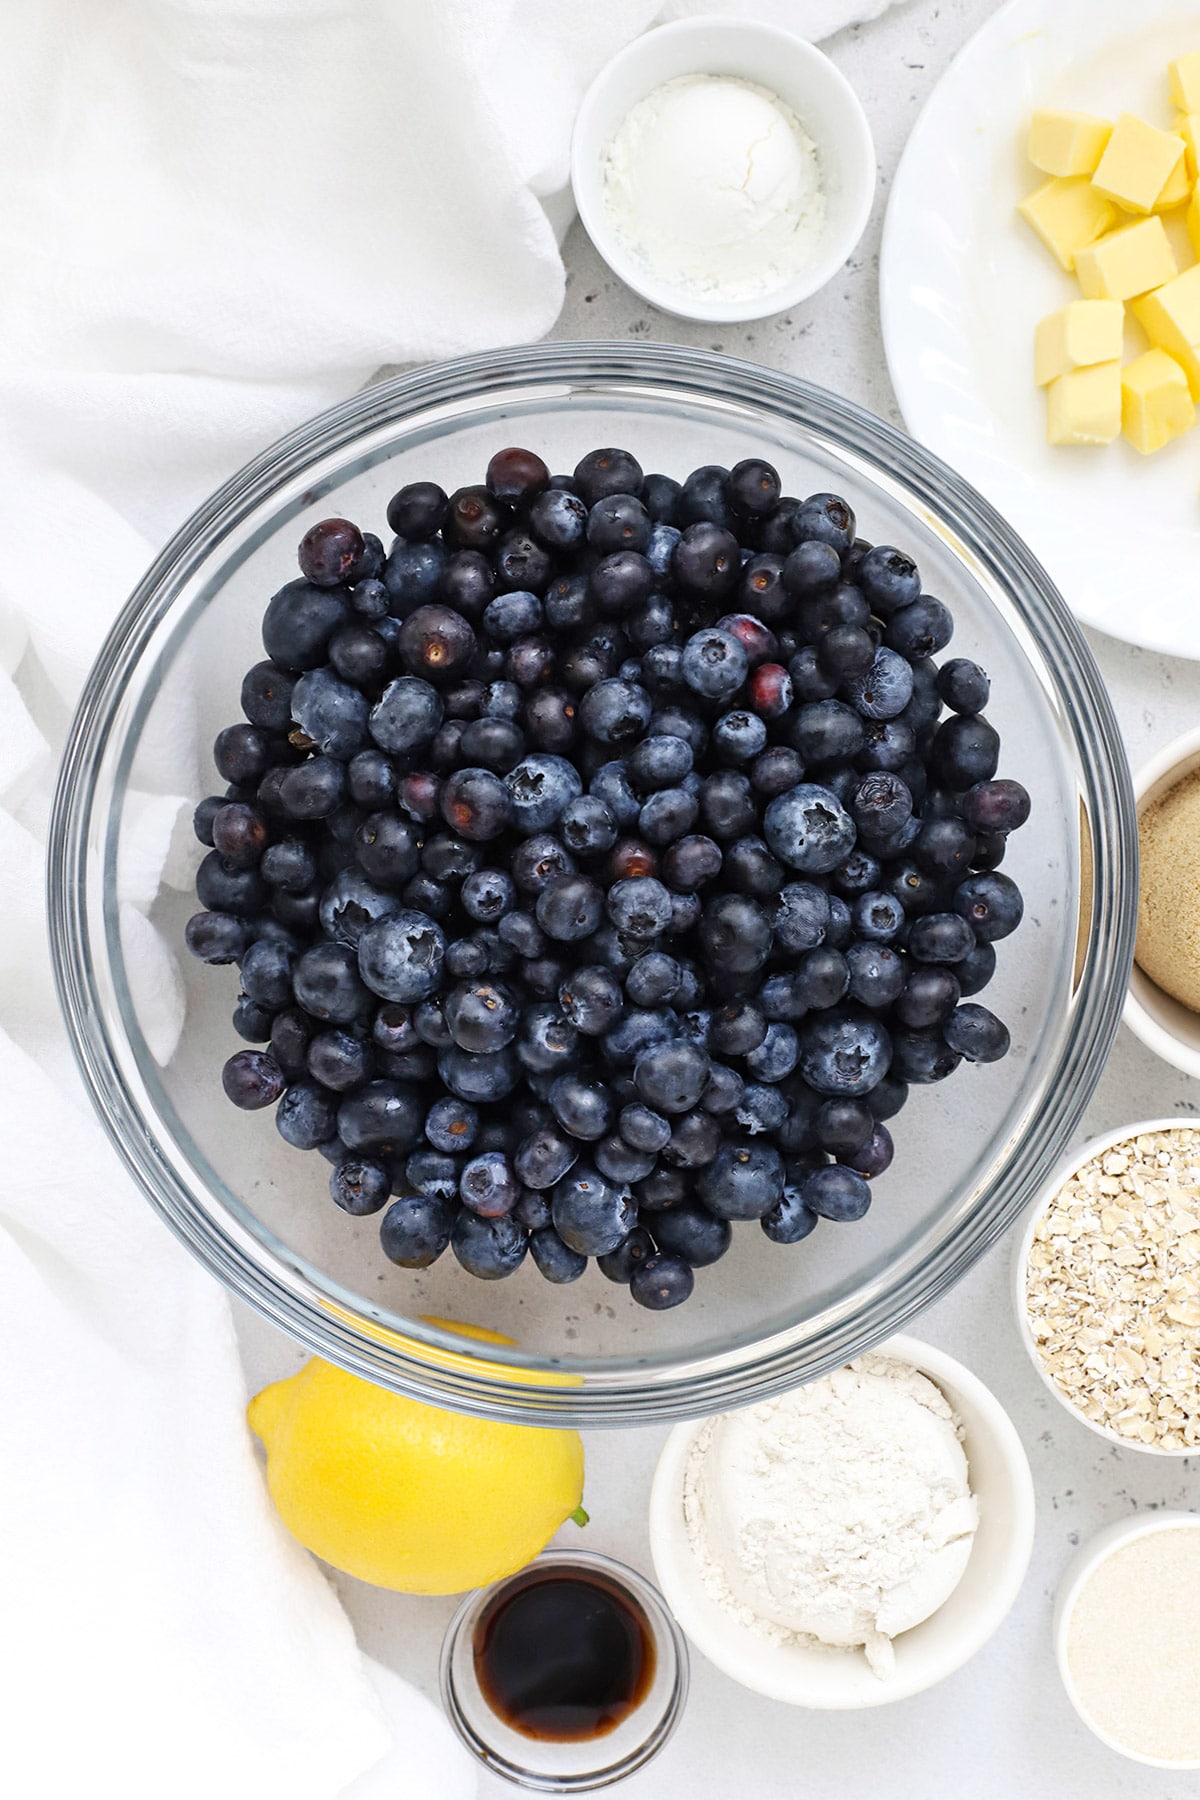 Overhead view of ingredients for gluten-free blueberry crisp